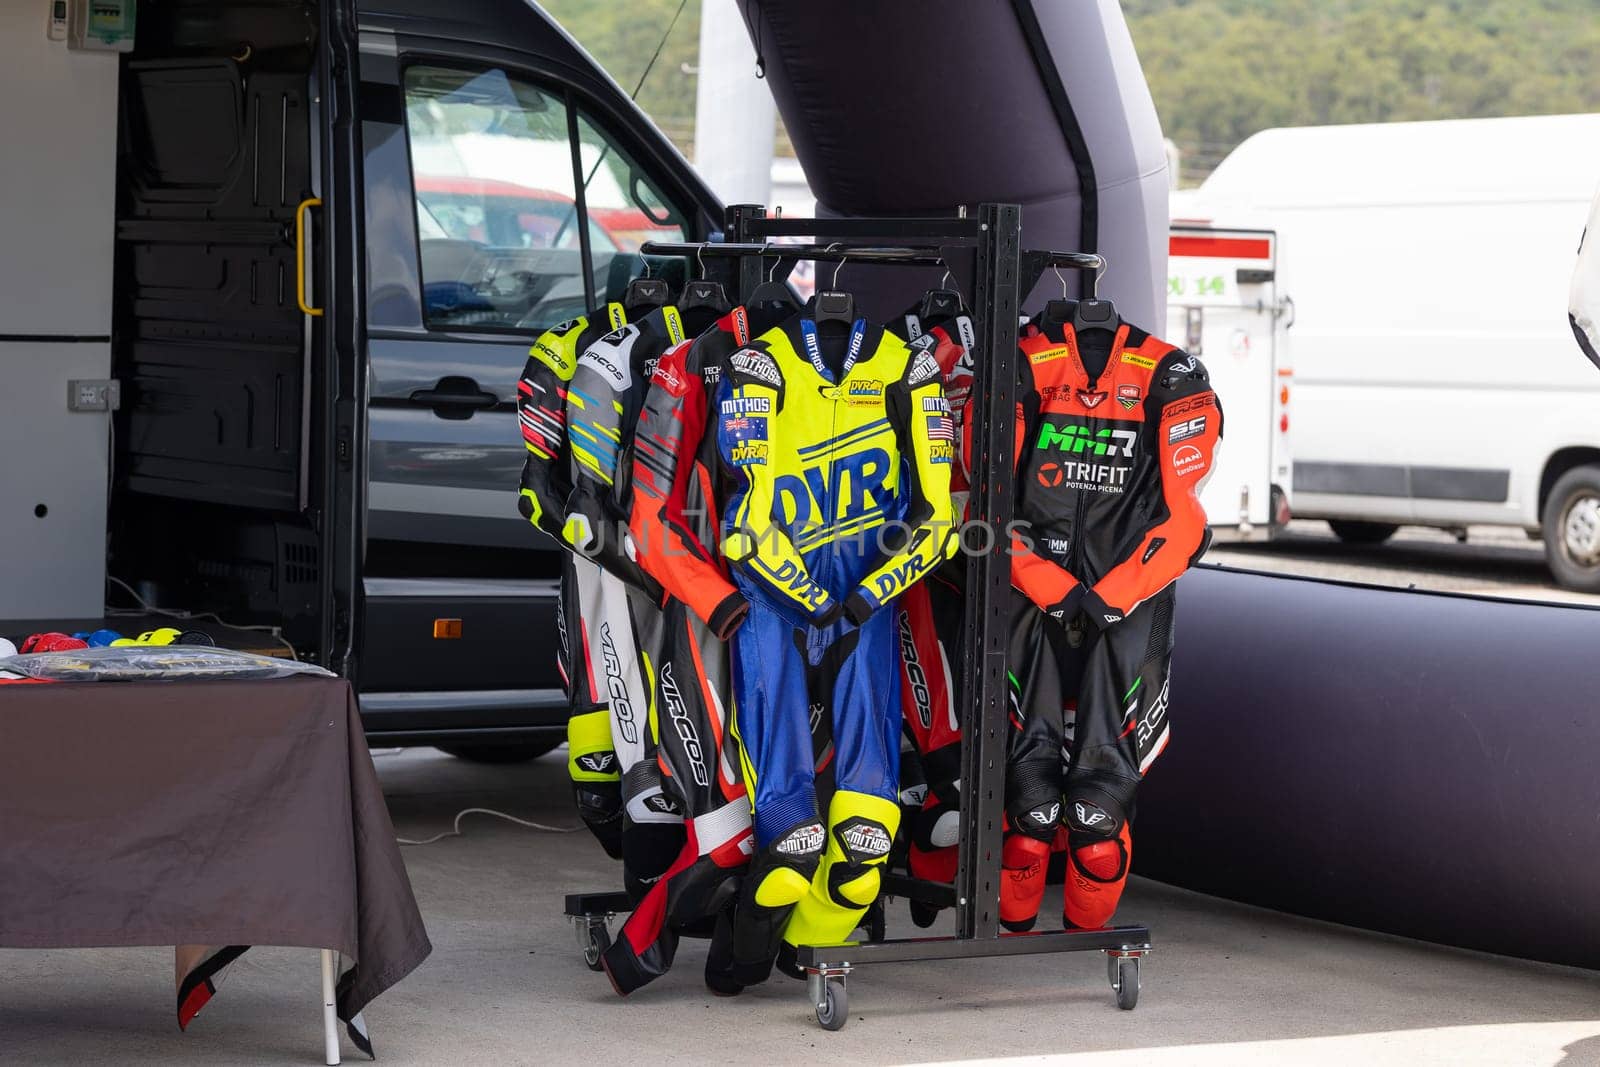 6 may 2023, Estoril, Portugal - MotoGP racing - A Stylish Collection of Motorbike Gear Displayed in Front of a Vintage Van by Studia72